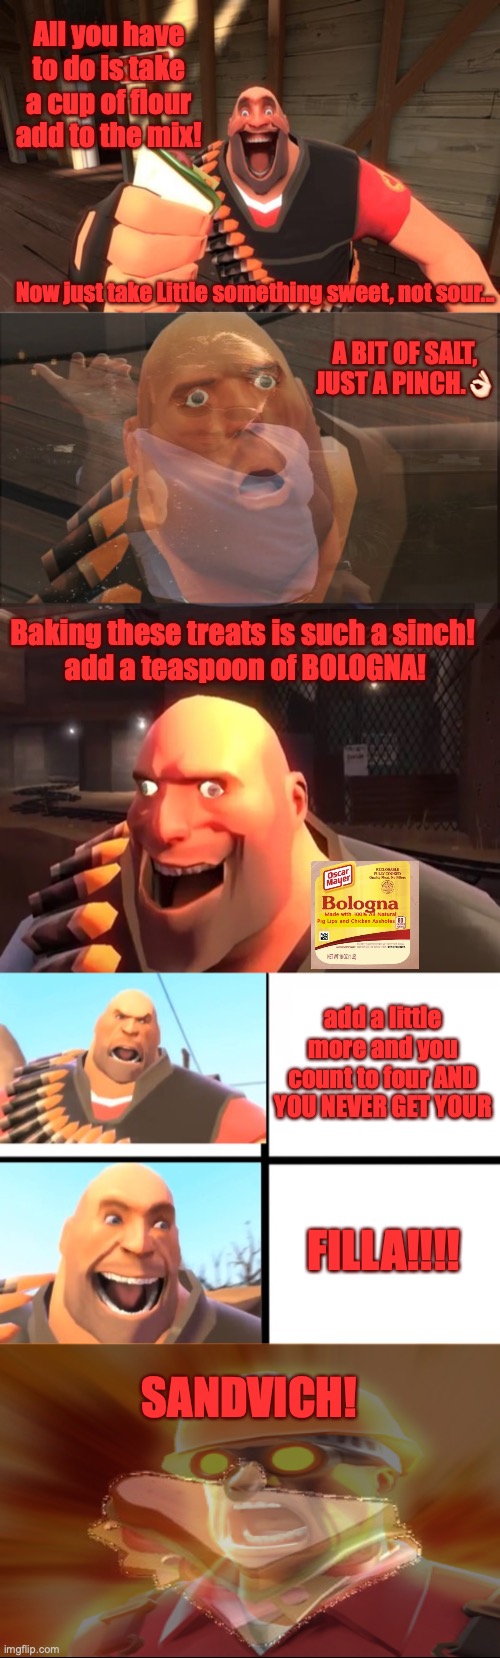 TF2 Sandwich song reply. | All you have to do is take a cup of flour add to the mix! Now just take Little something sweet, not sour... A BIT OF SALT, JUST A PINCH.👌🏻; Baking these treats is such a sinch! 
add a teaspoon of BOLOGNA! add a little more and you count to four AND YOU NEVER GET YOUR; FILLA!!!! SANDVICH! | image tagged in sandvich fixes everything,how is dis possible meme tf2 heavy,tf2 heavy i have plan,tf2 heavy,sandvich,reply | made w/ Imgflip meme maker